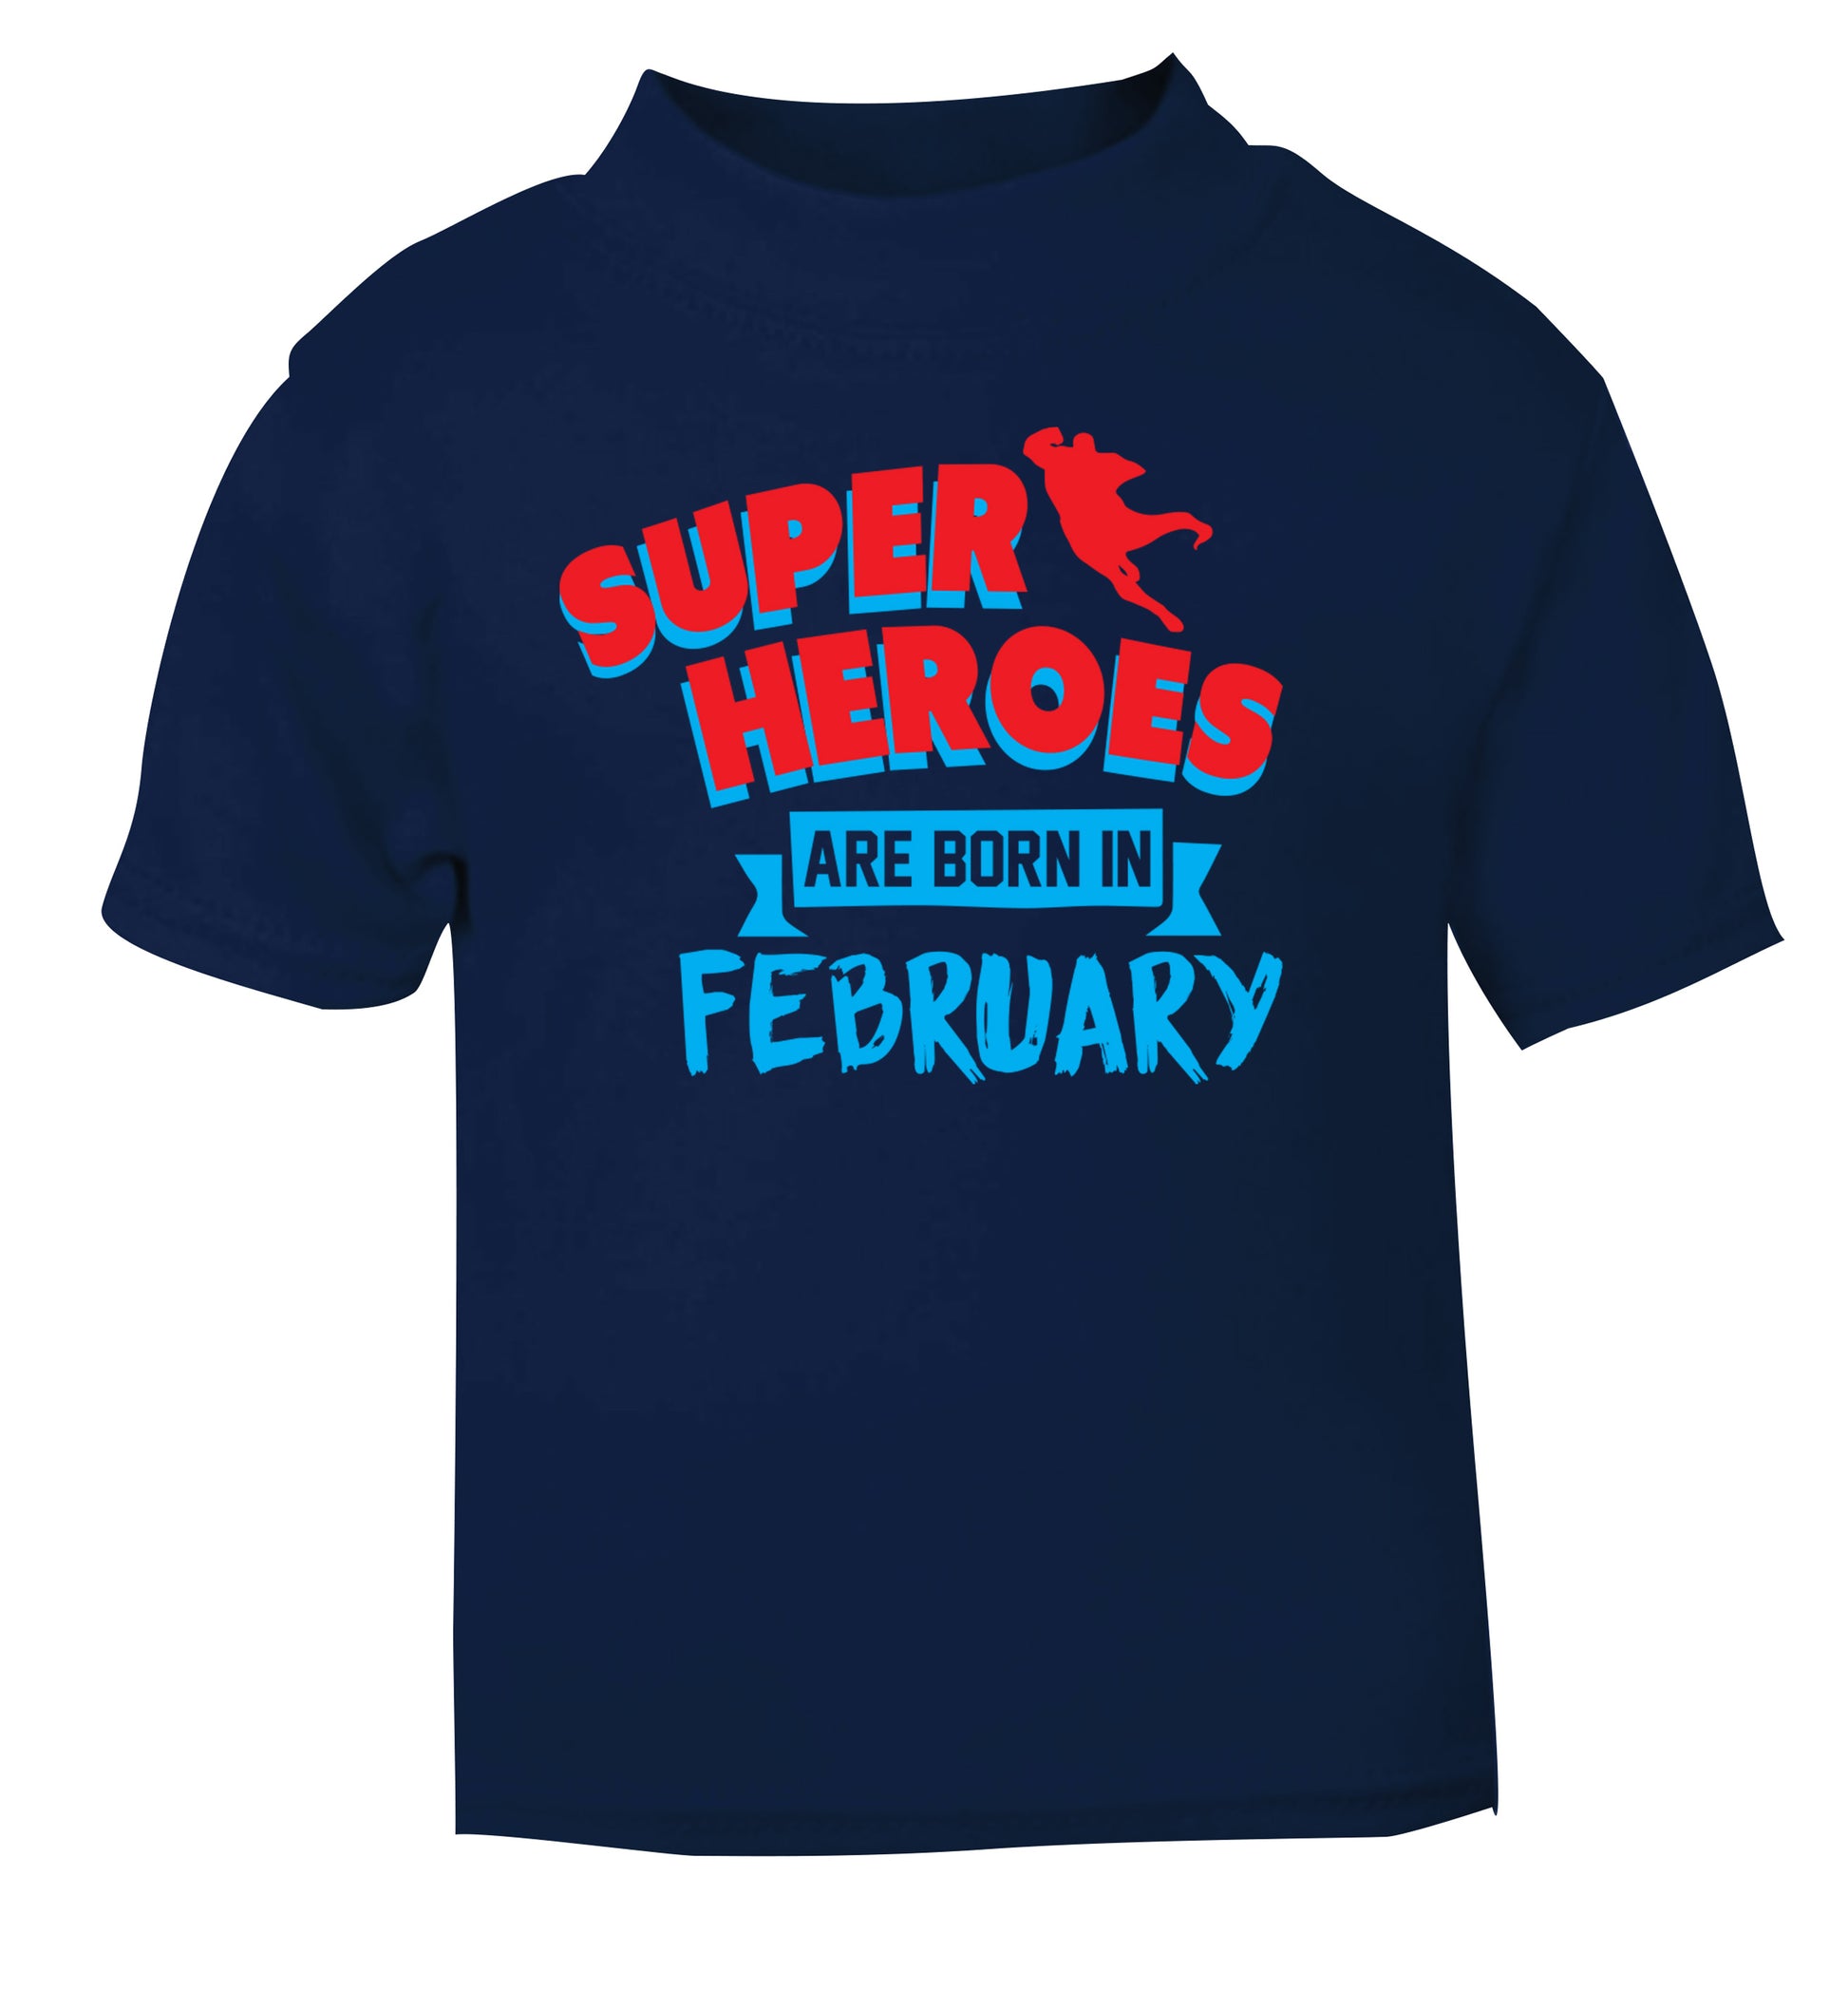 superheroes are born in February navy Baby Toddler Tshirt 2 Years